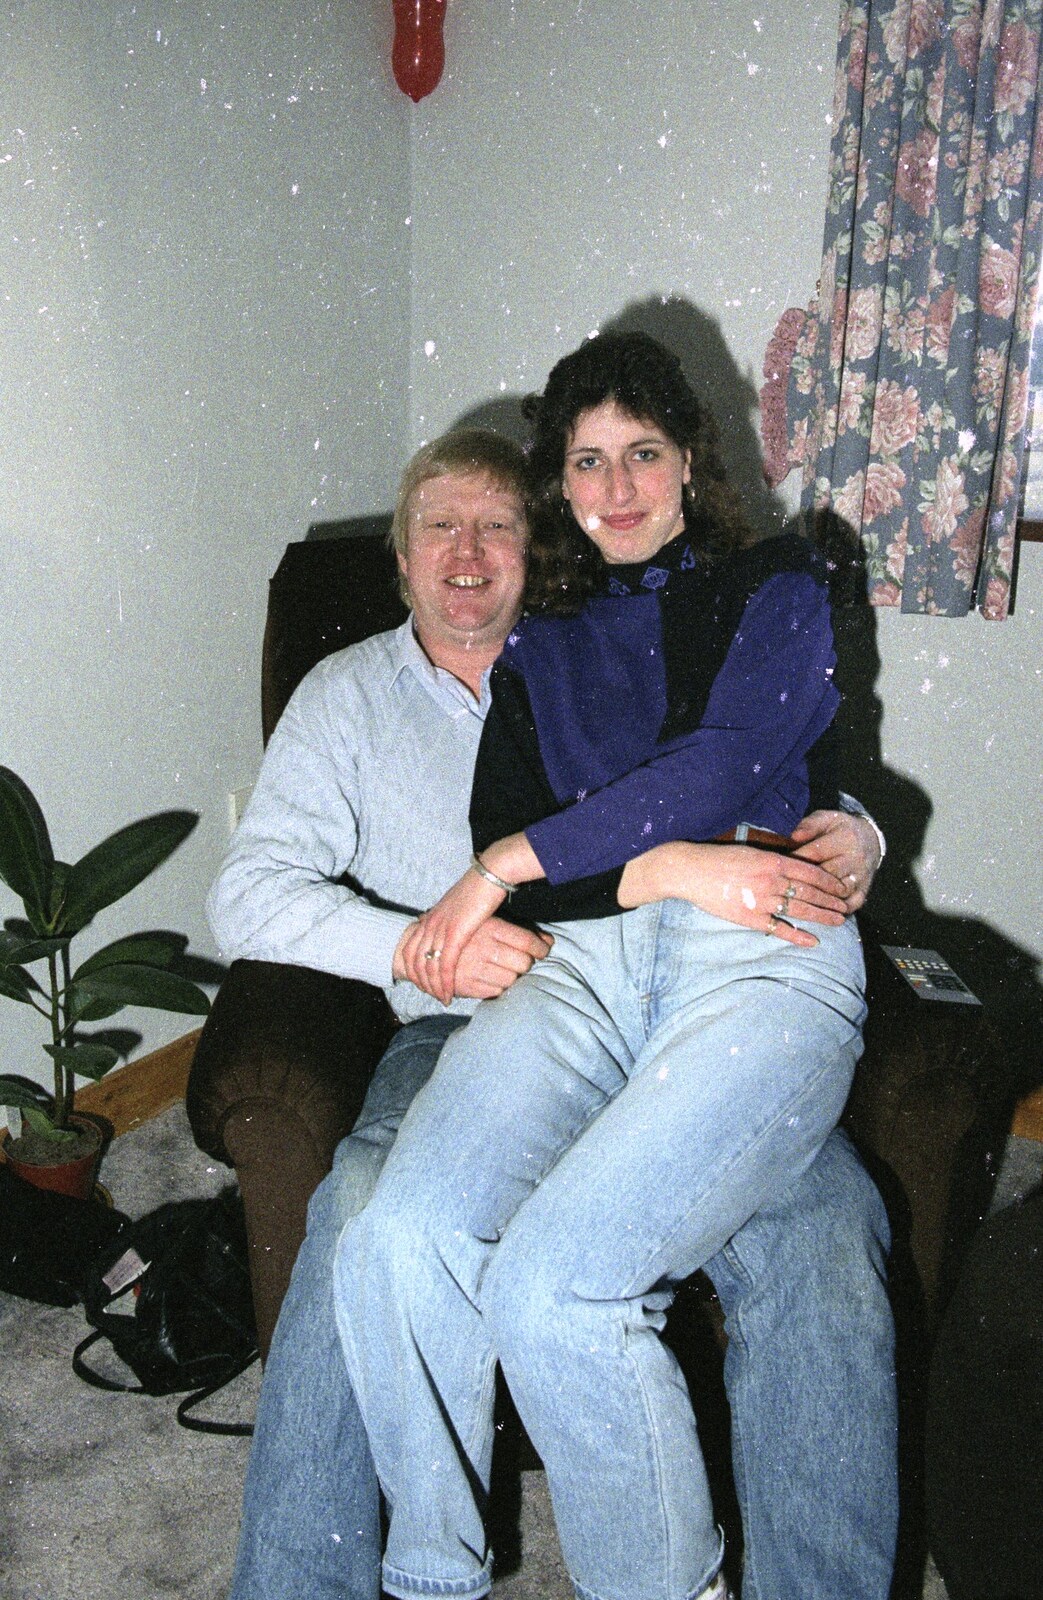 Alan and Karen from Late Night, and Christmas with the Coxes, Needham, Norfolk - 25th December 1989